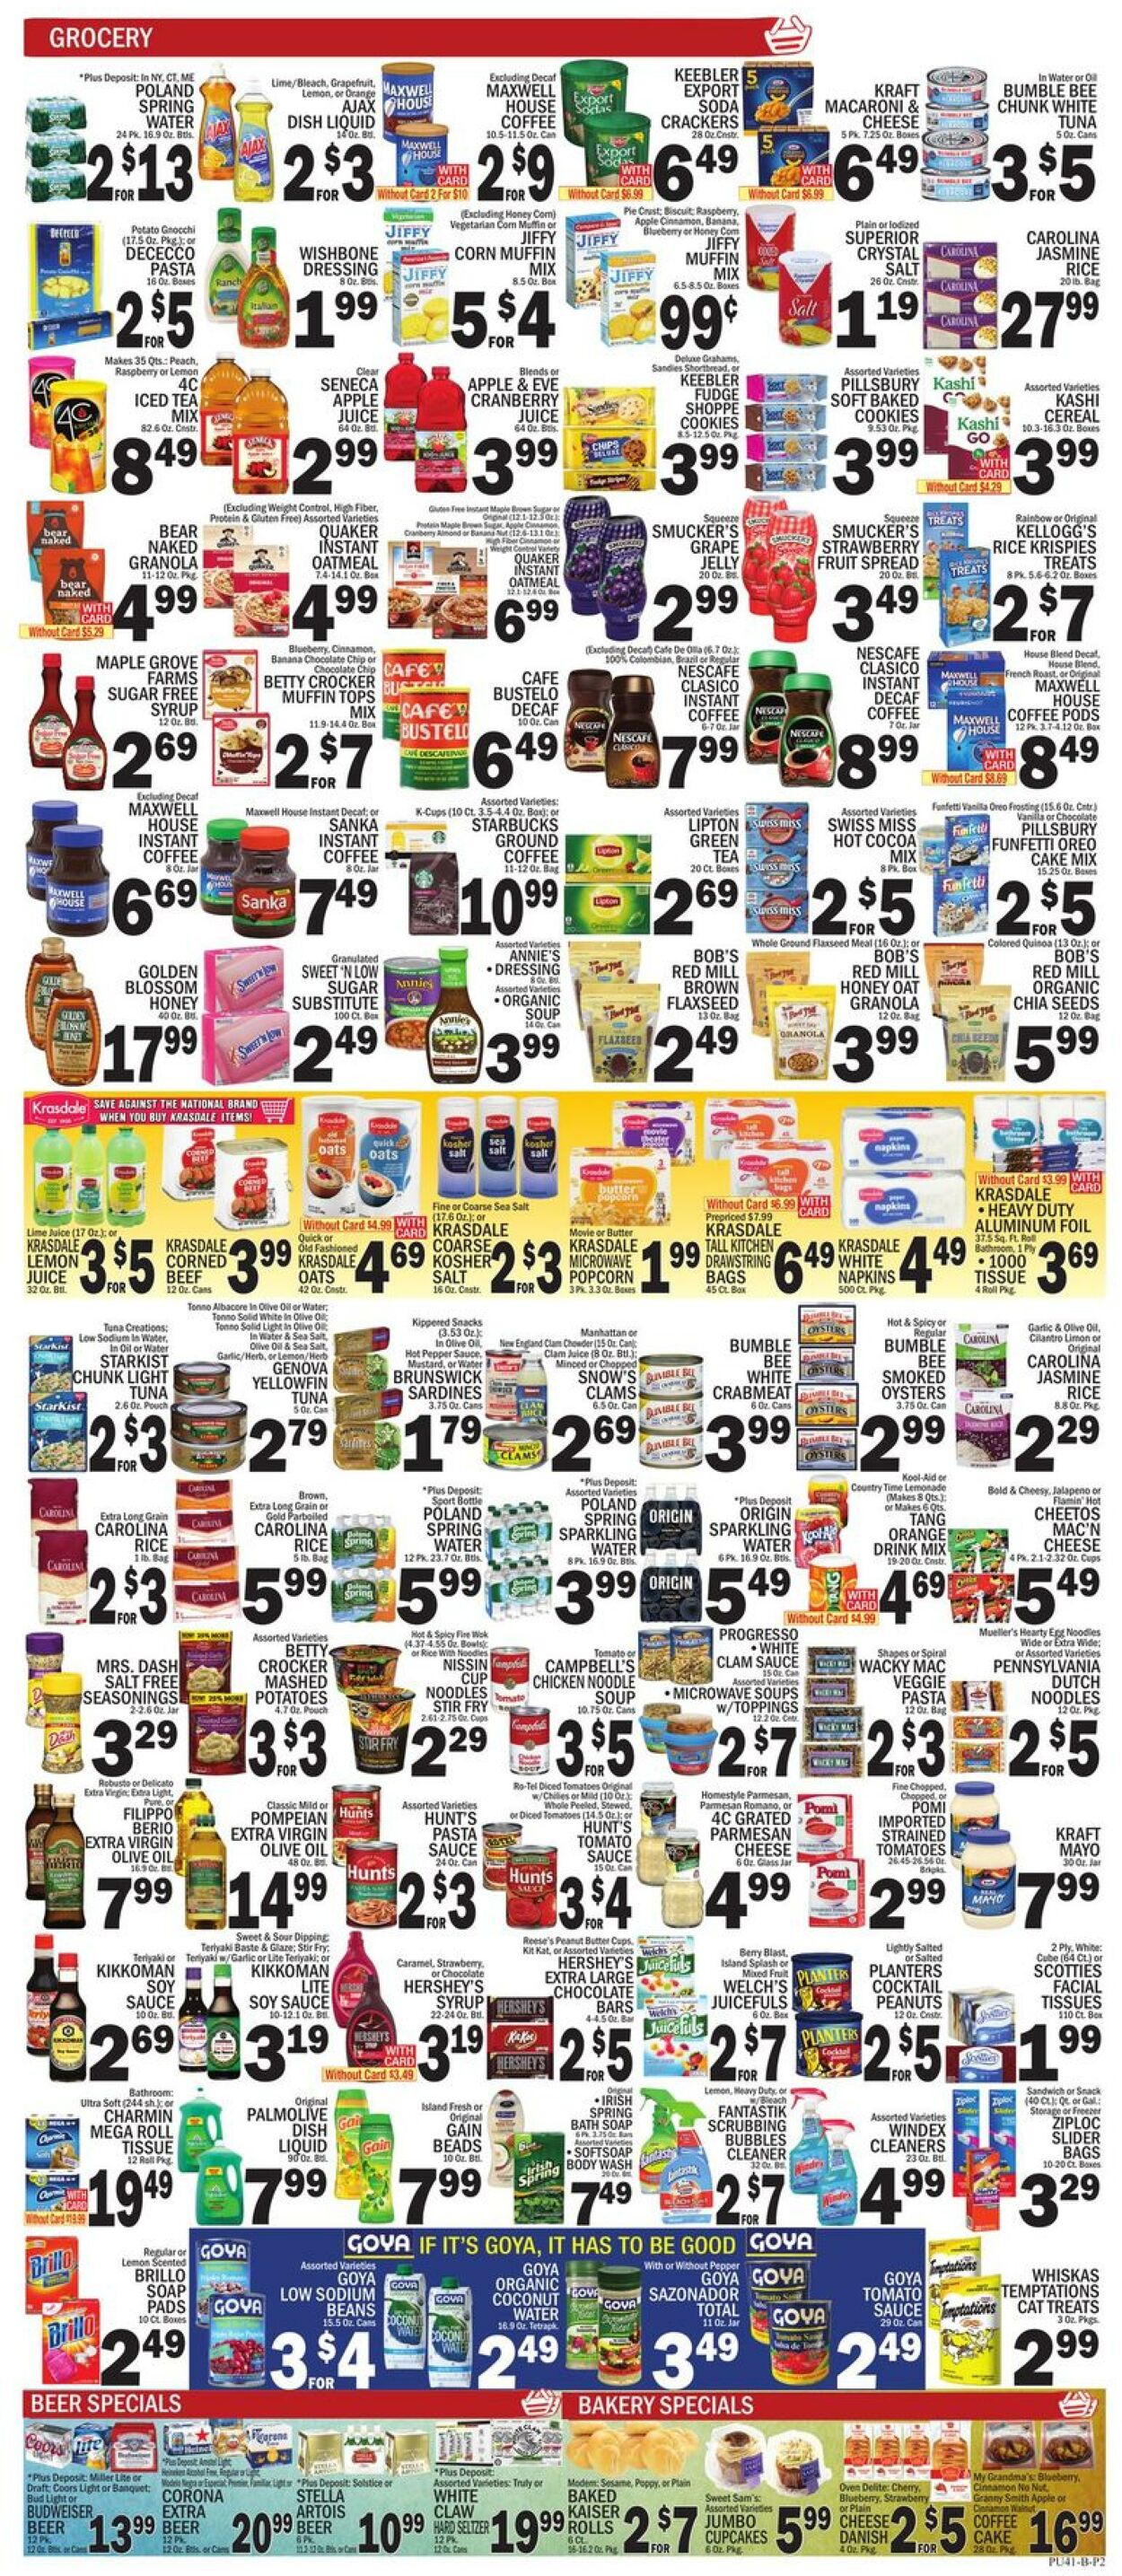 Weekly ad CTown 01/20/2023 - 01/26/2023